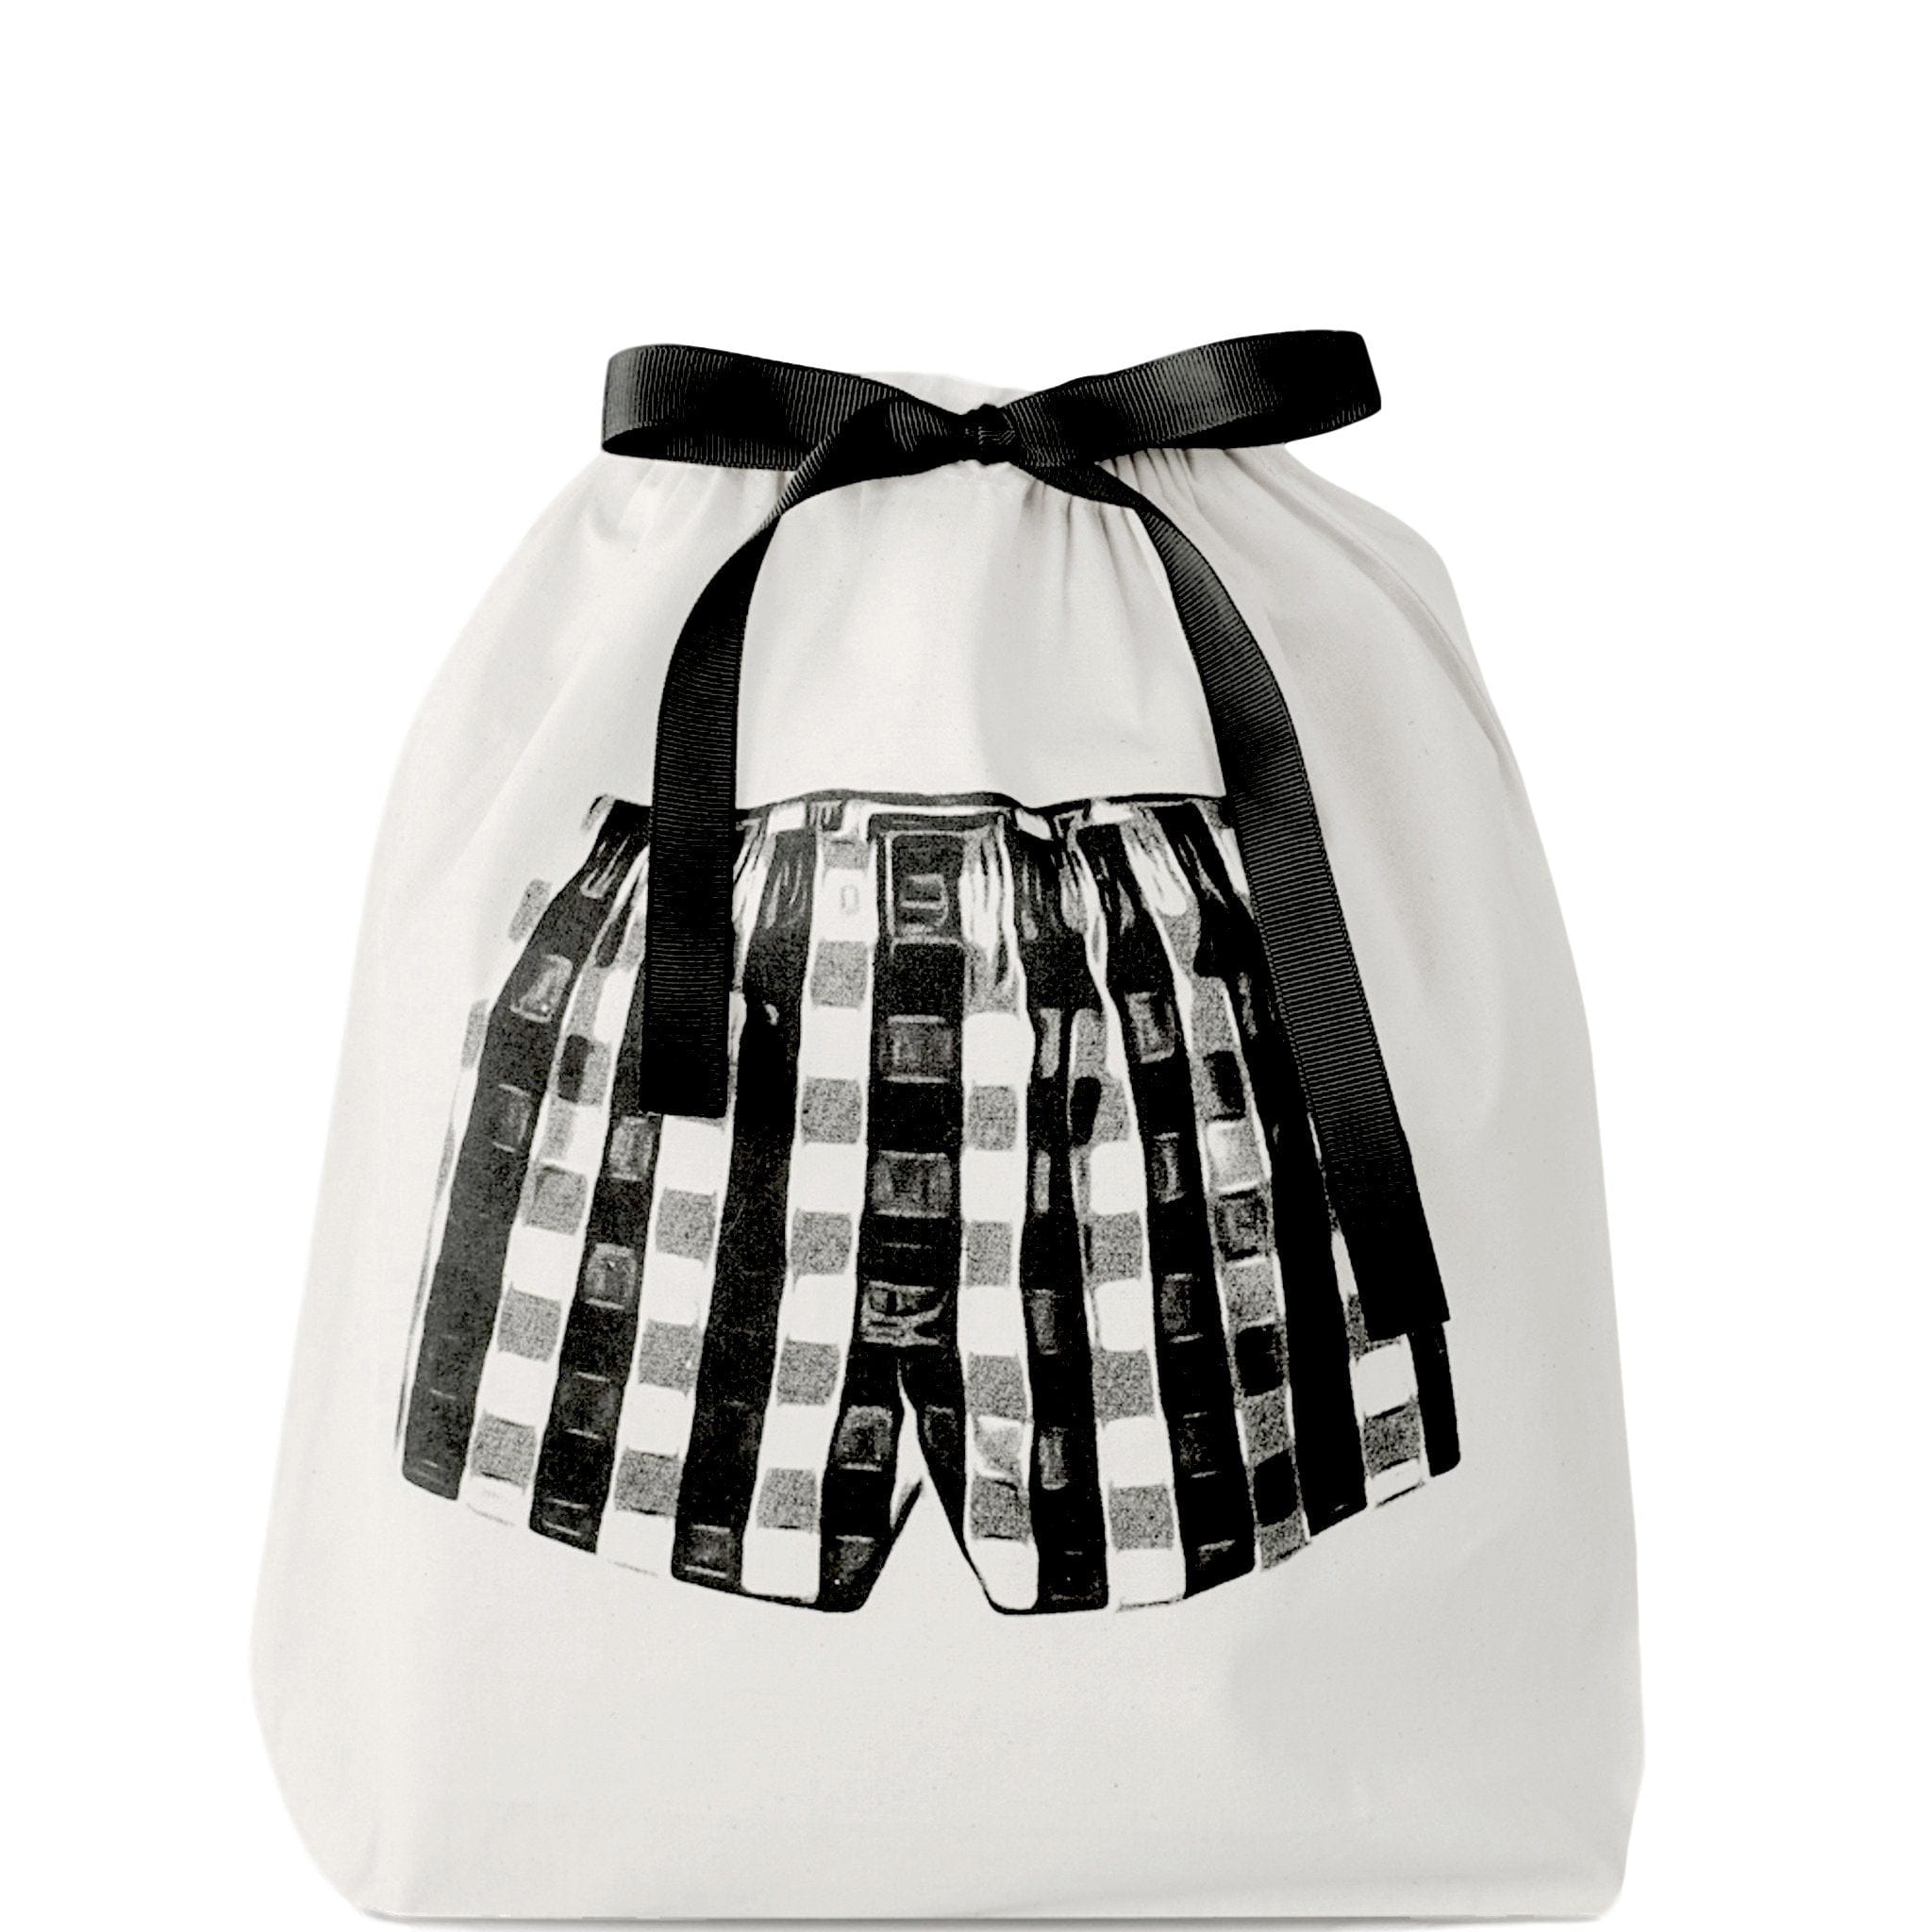 Cream travel organizing bag with checkered boxes printed on the front. 